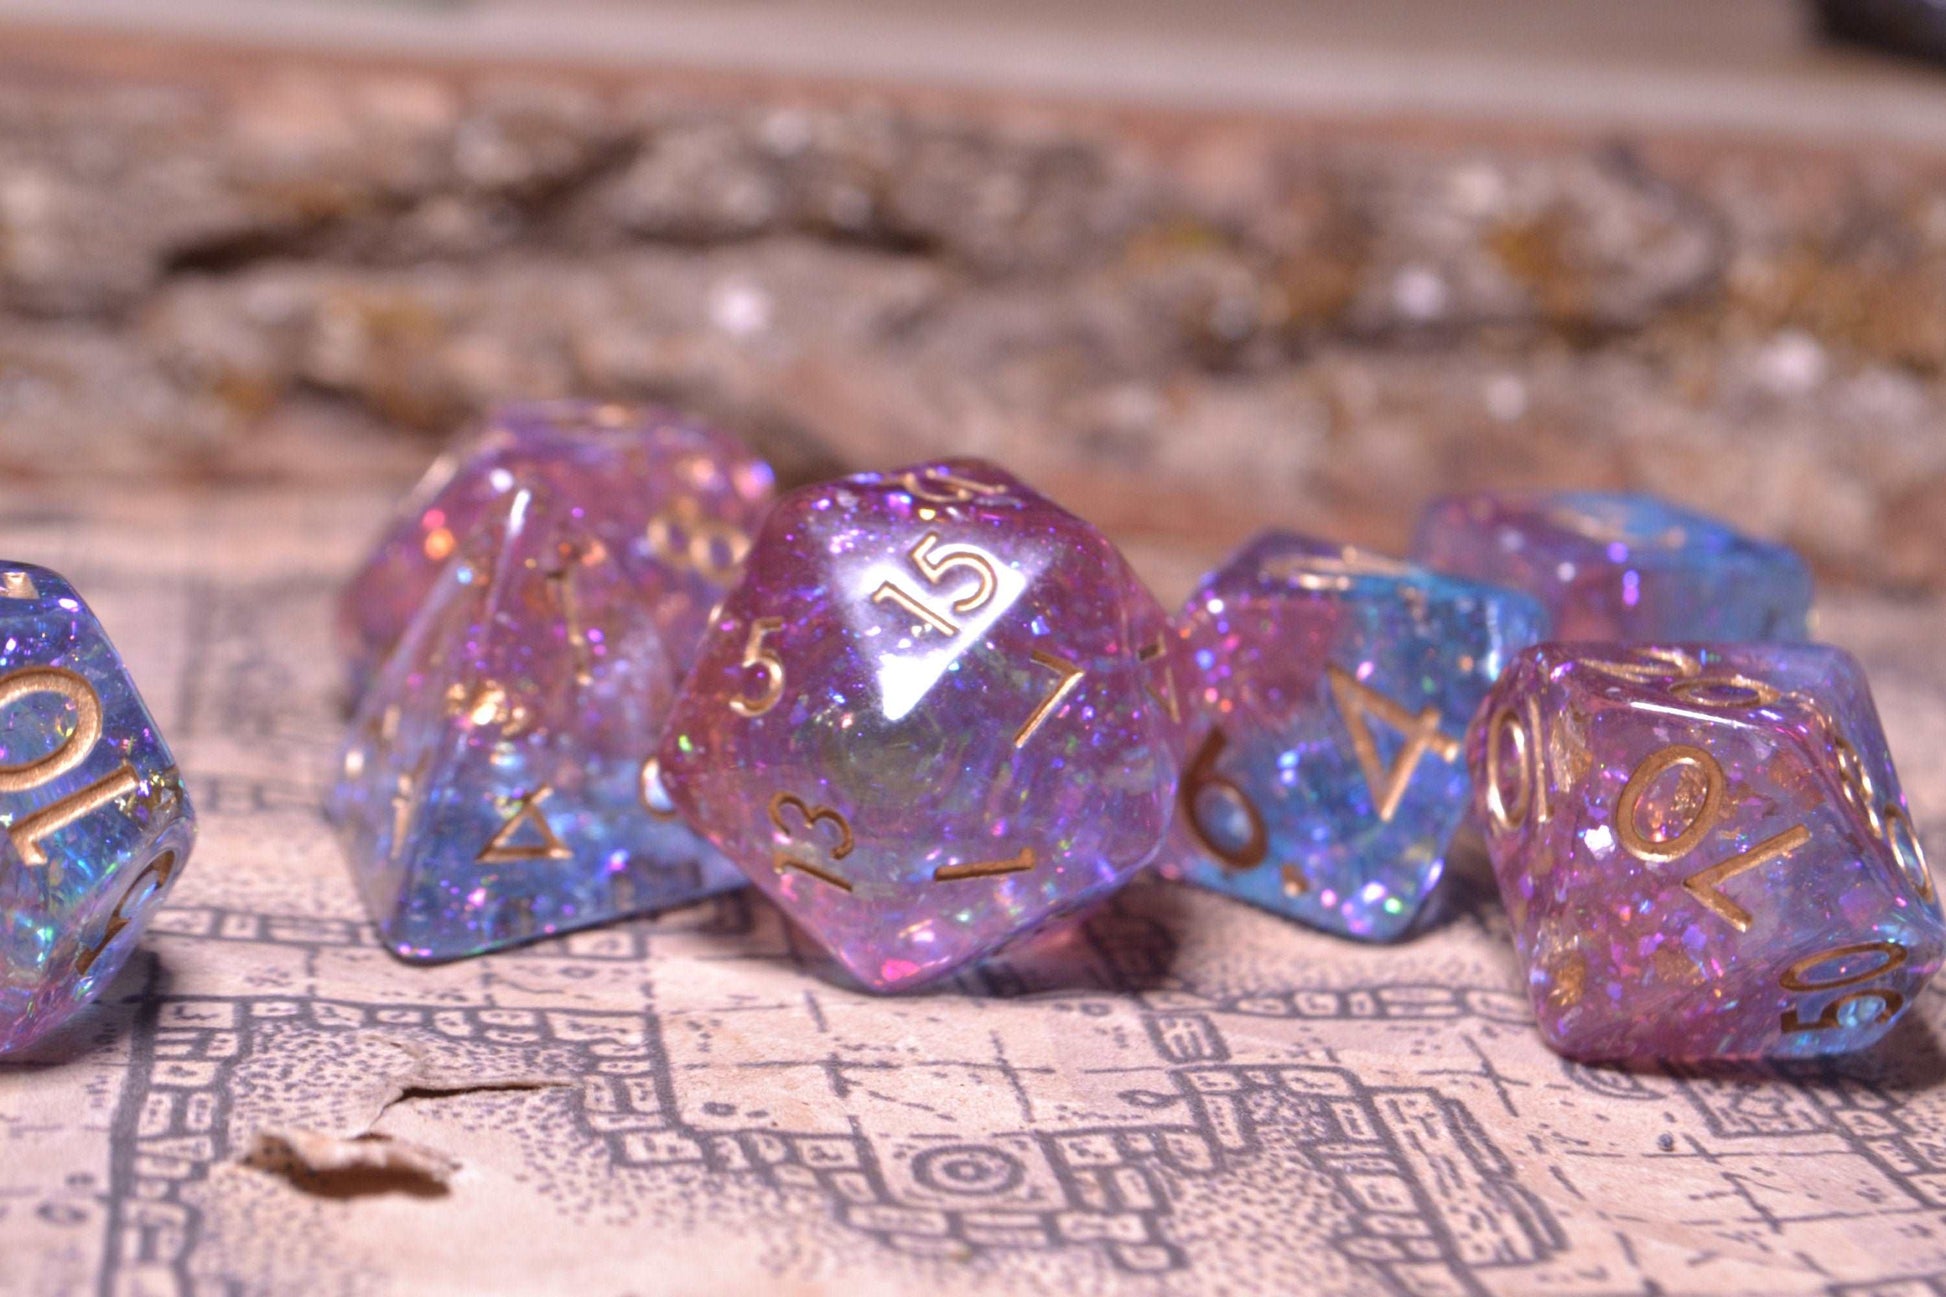 Nebula - Light Purple, Blue, Pink Soft Edge Resin D&D Dice Set With Metallic Gold Numbering - For Dungeons and Dragons